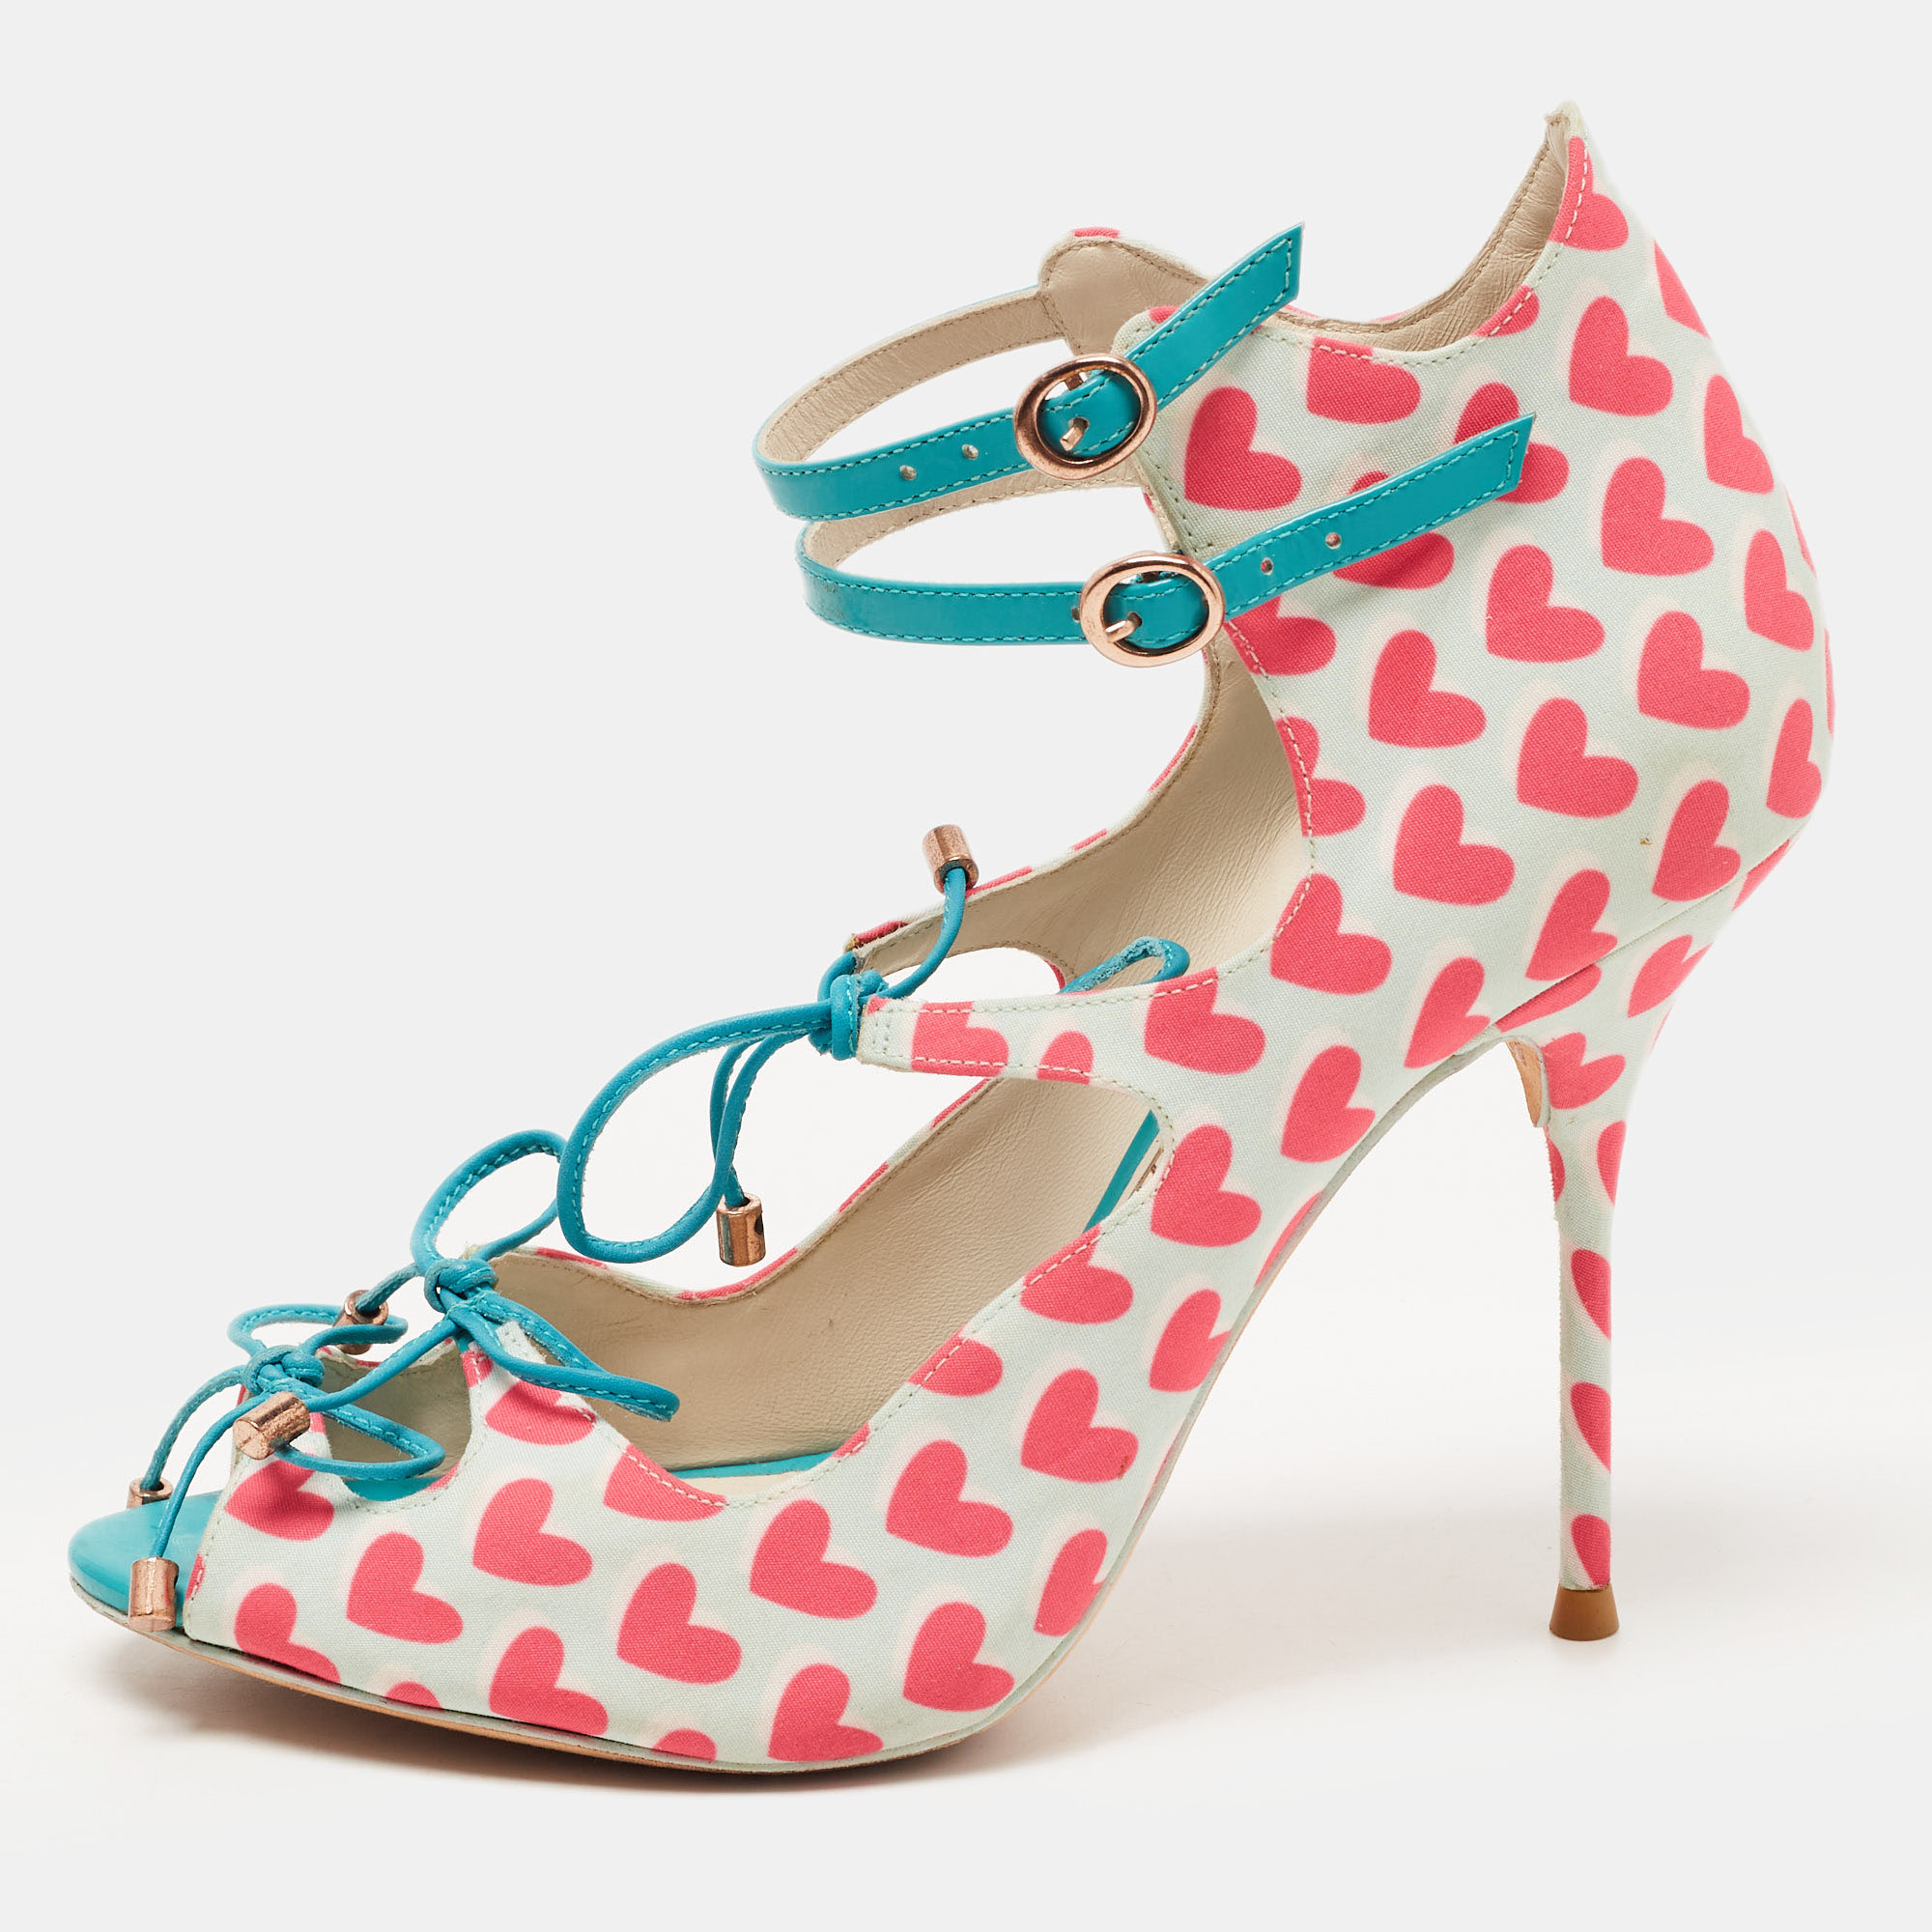 Sophia Webster Multicolor Nylon And Leather Heart Print Ankle Strap Pumps Size 38